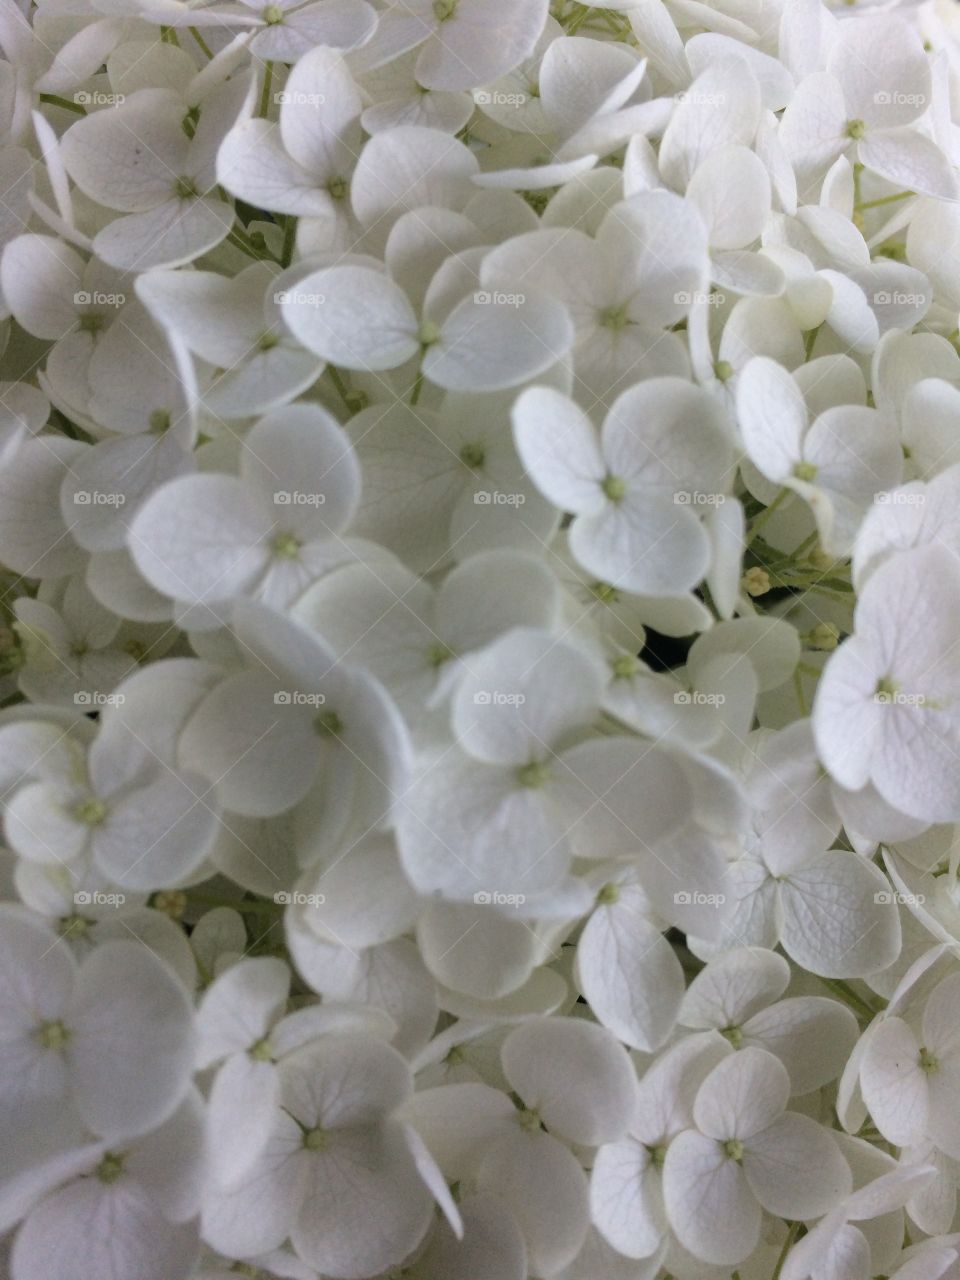 Nothing but Snow White hydrangea blossoms. There must be at least 100 of tiny little flowers. 